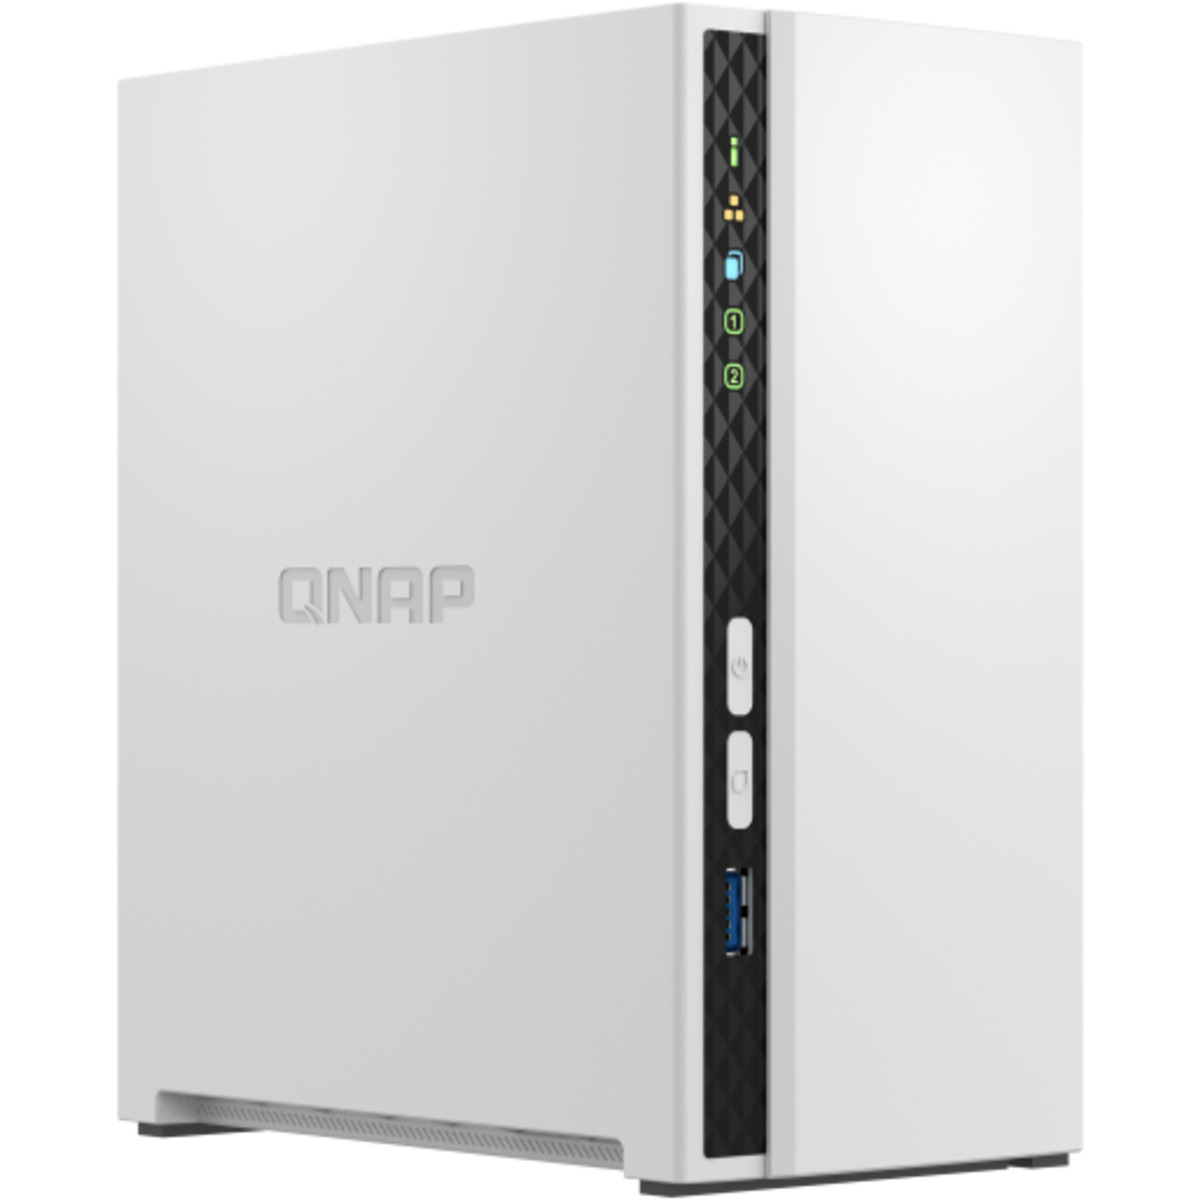 QNAP TS-233 28tb 2-Bay Desktop Personal / Basic Home / Small Office NAS - Network Attached Storage Device 2x14tb Western Digital Gold WD142KRYZ 3.5 7200rpm SATA 6Gb/s HDD ENTERPRISE Class Drives Installed - Burn-In Tested TS-233